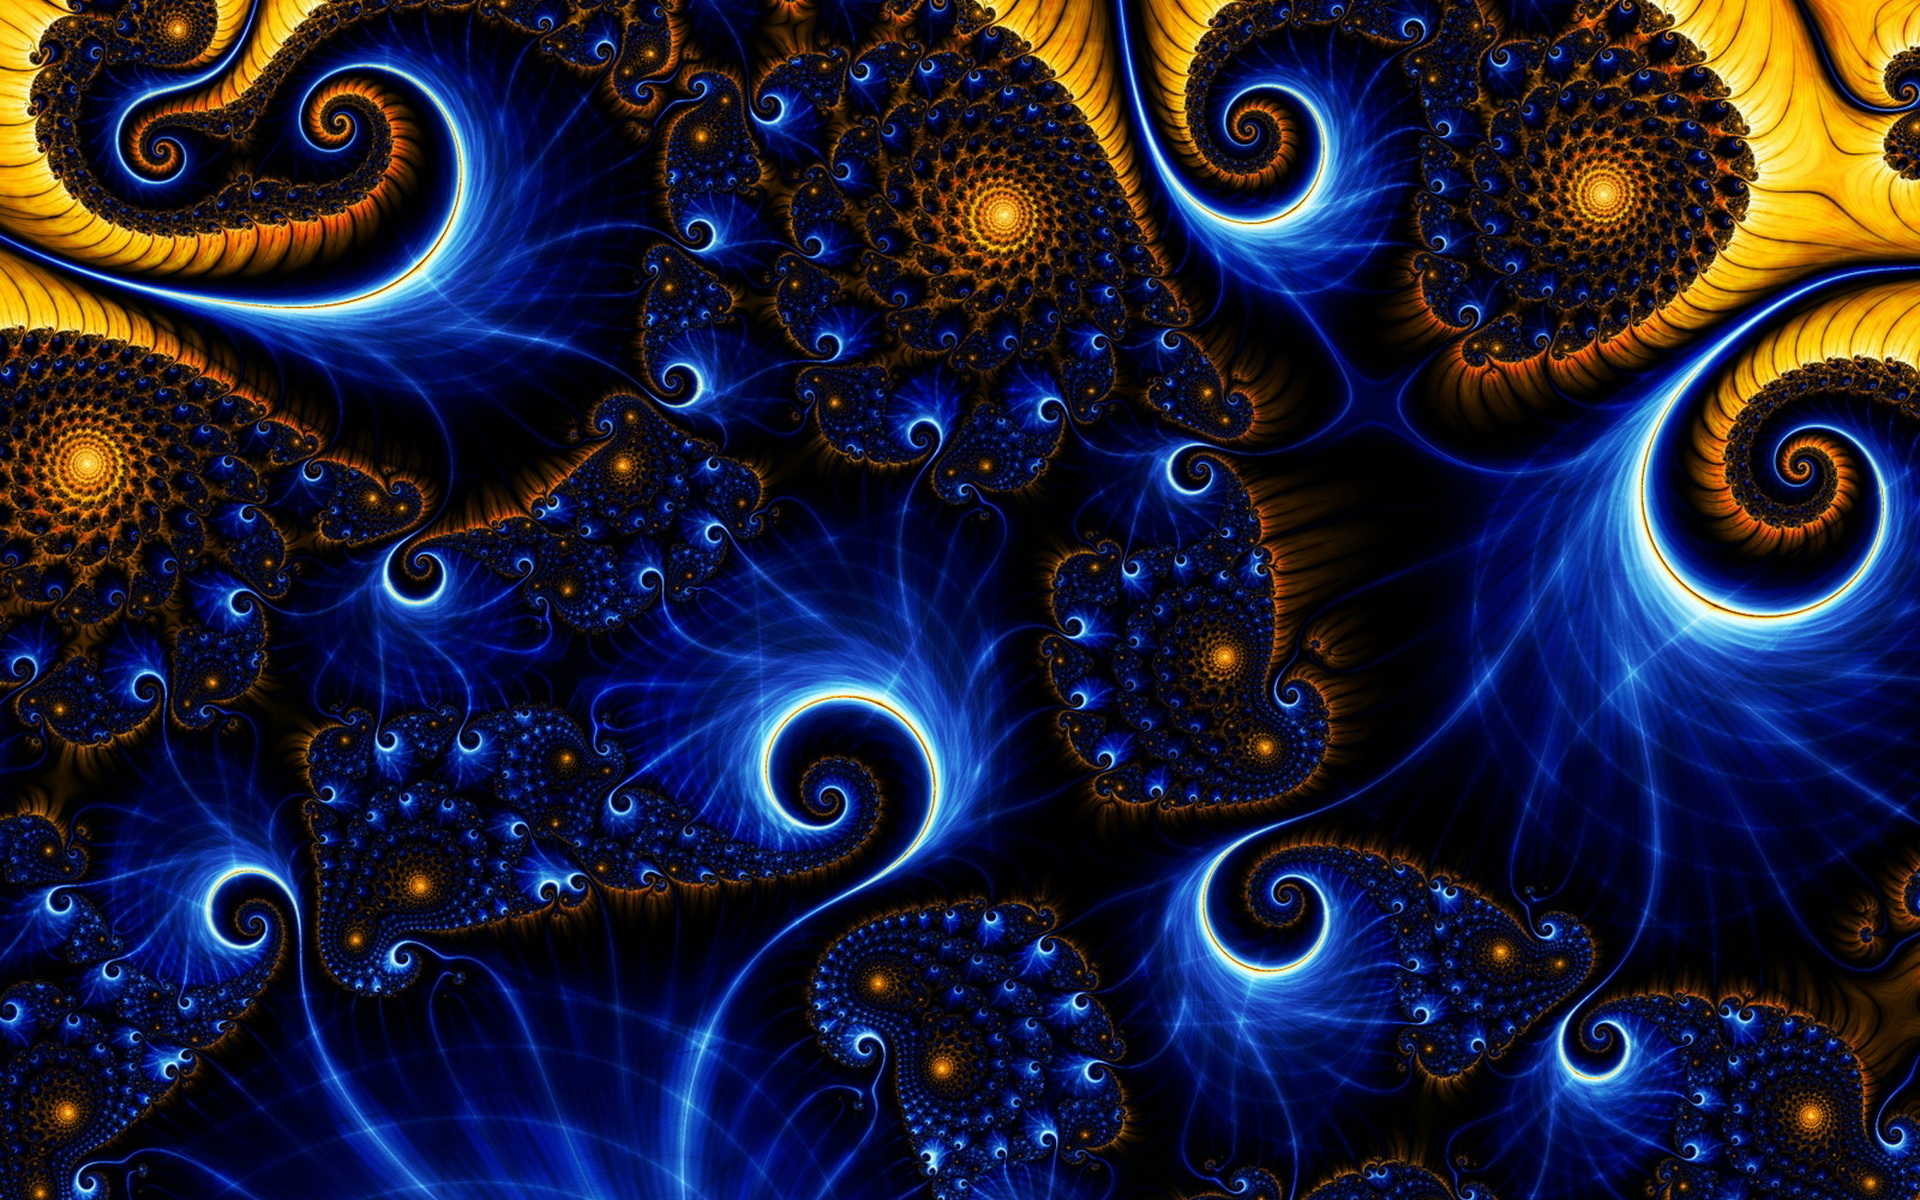 Image: Fractal, drawing, patterns, curves, blue lines, abstraction